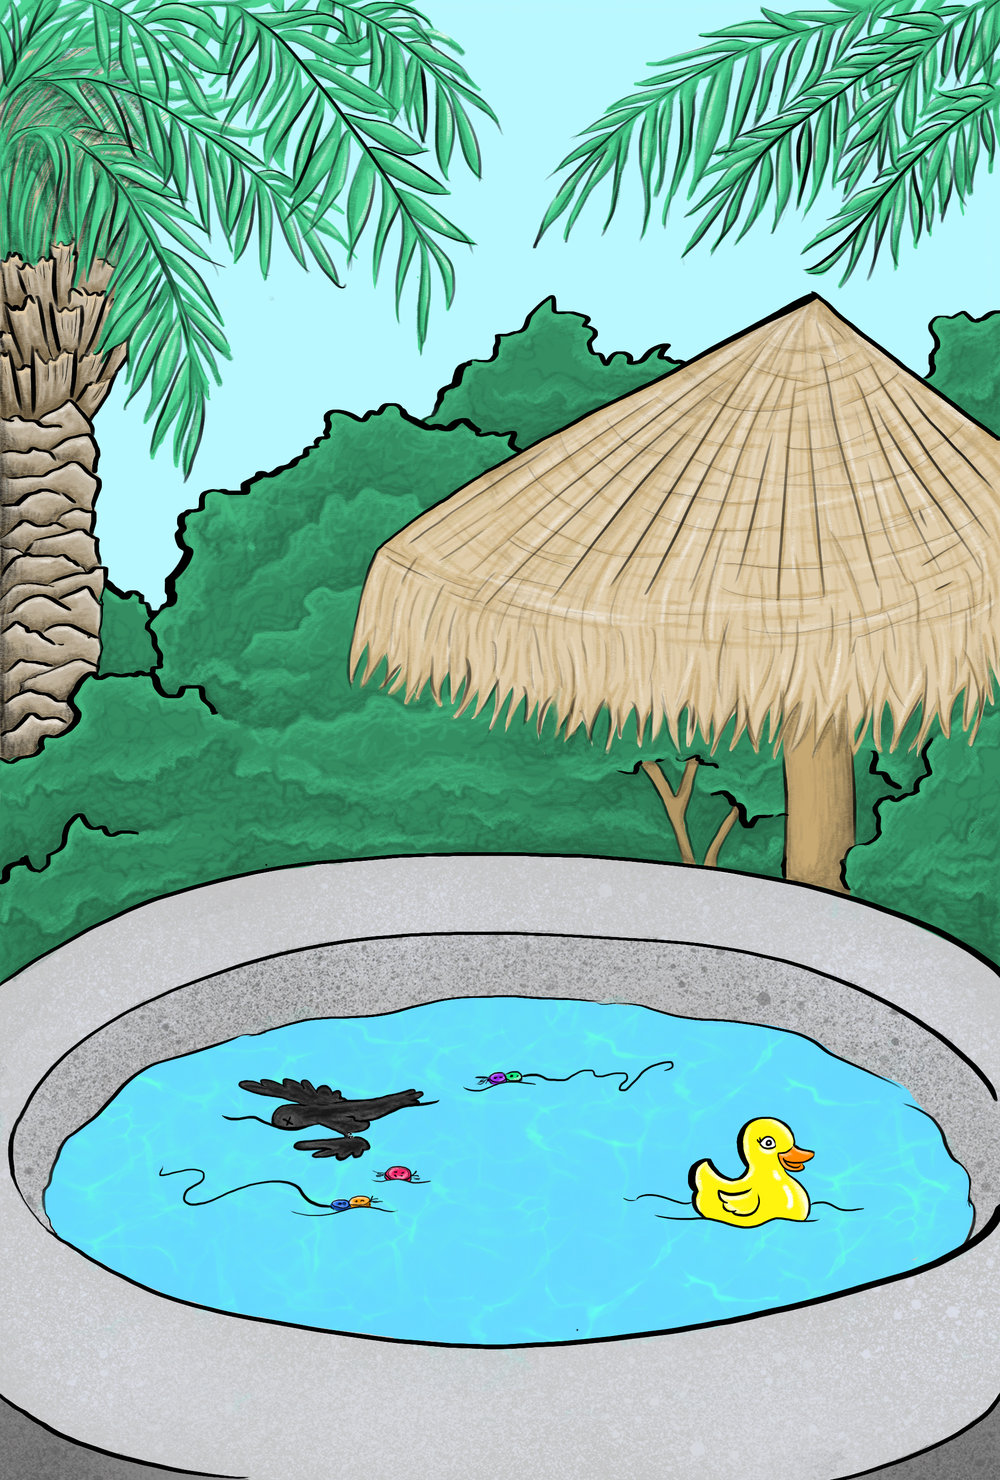 Page 7 Mr. Buttons is floating in the hot tub, dead, the duck swims around innocently